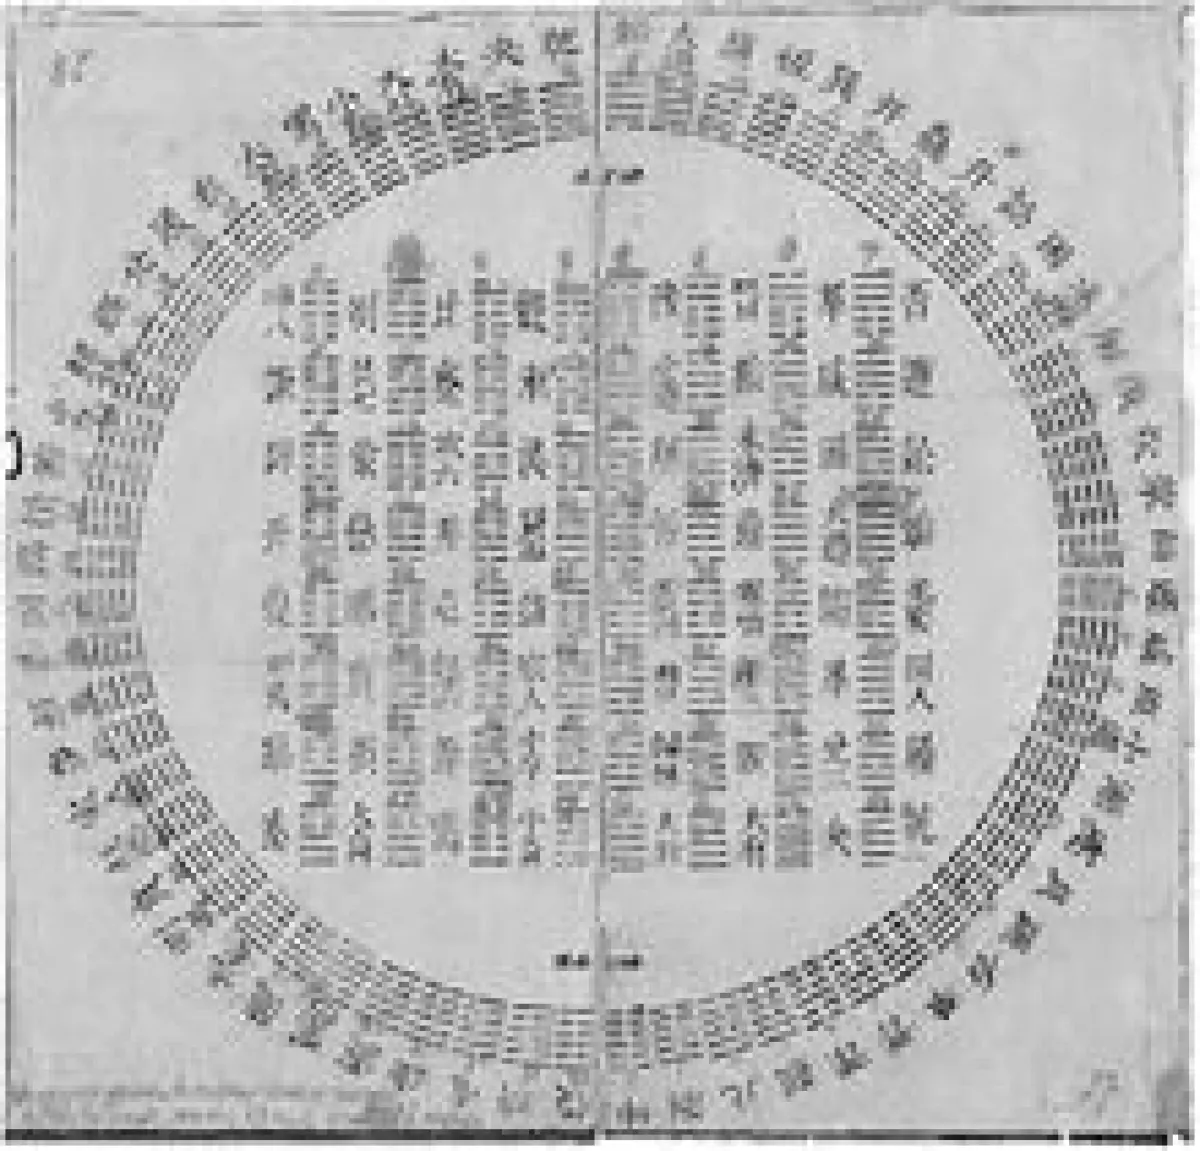 I Ching's influence